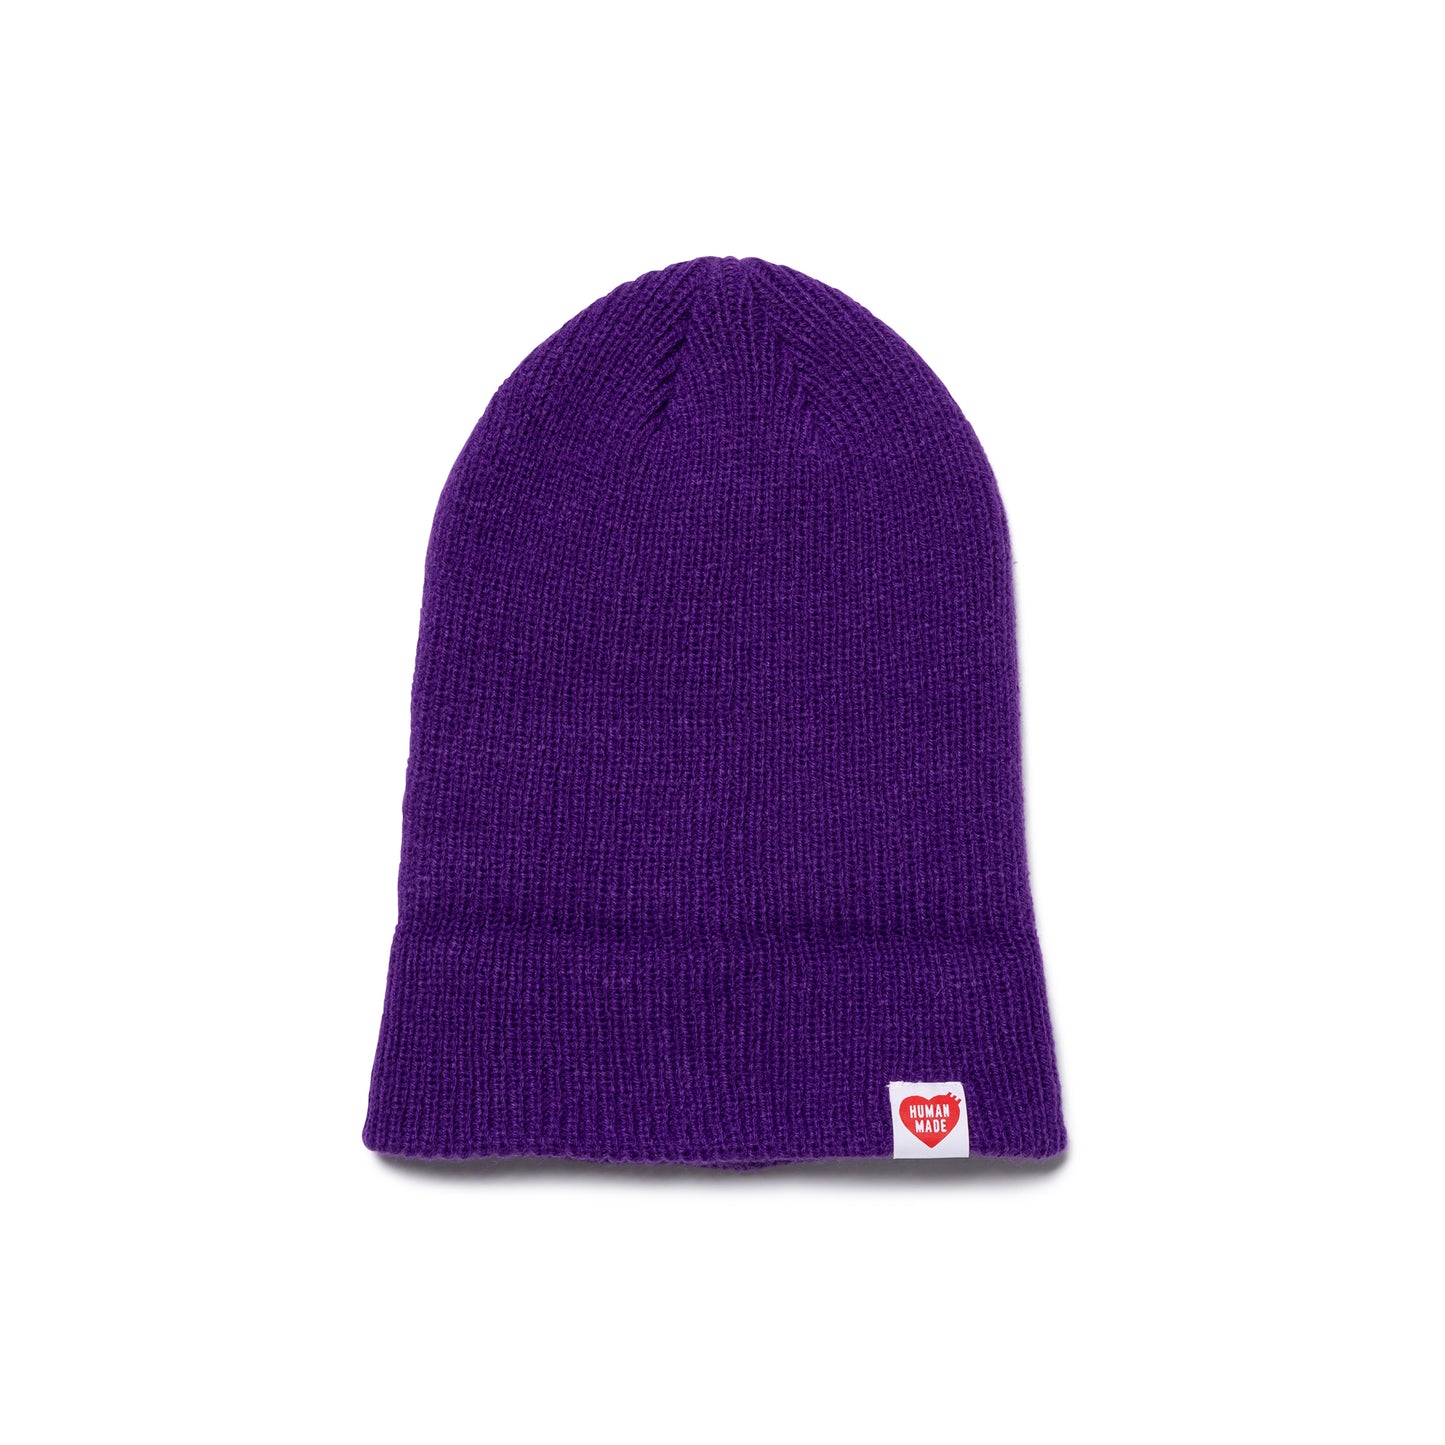 CLASSIC BEANIE – HUMAN MADE ONLINE STORE